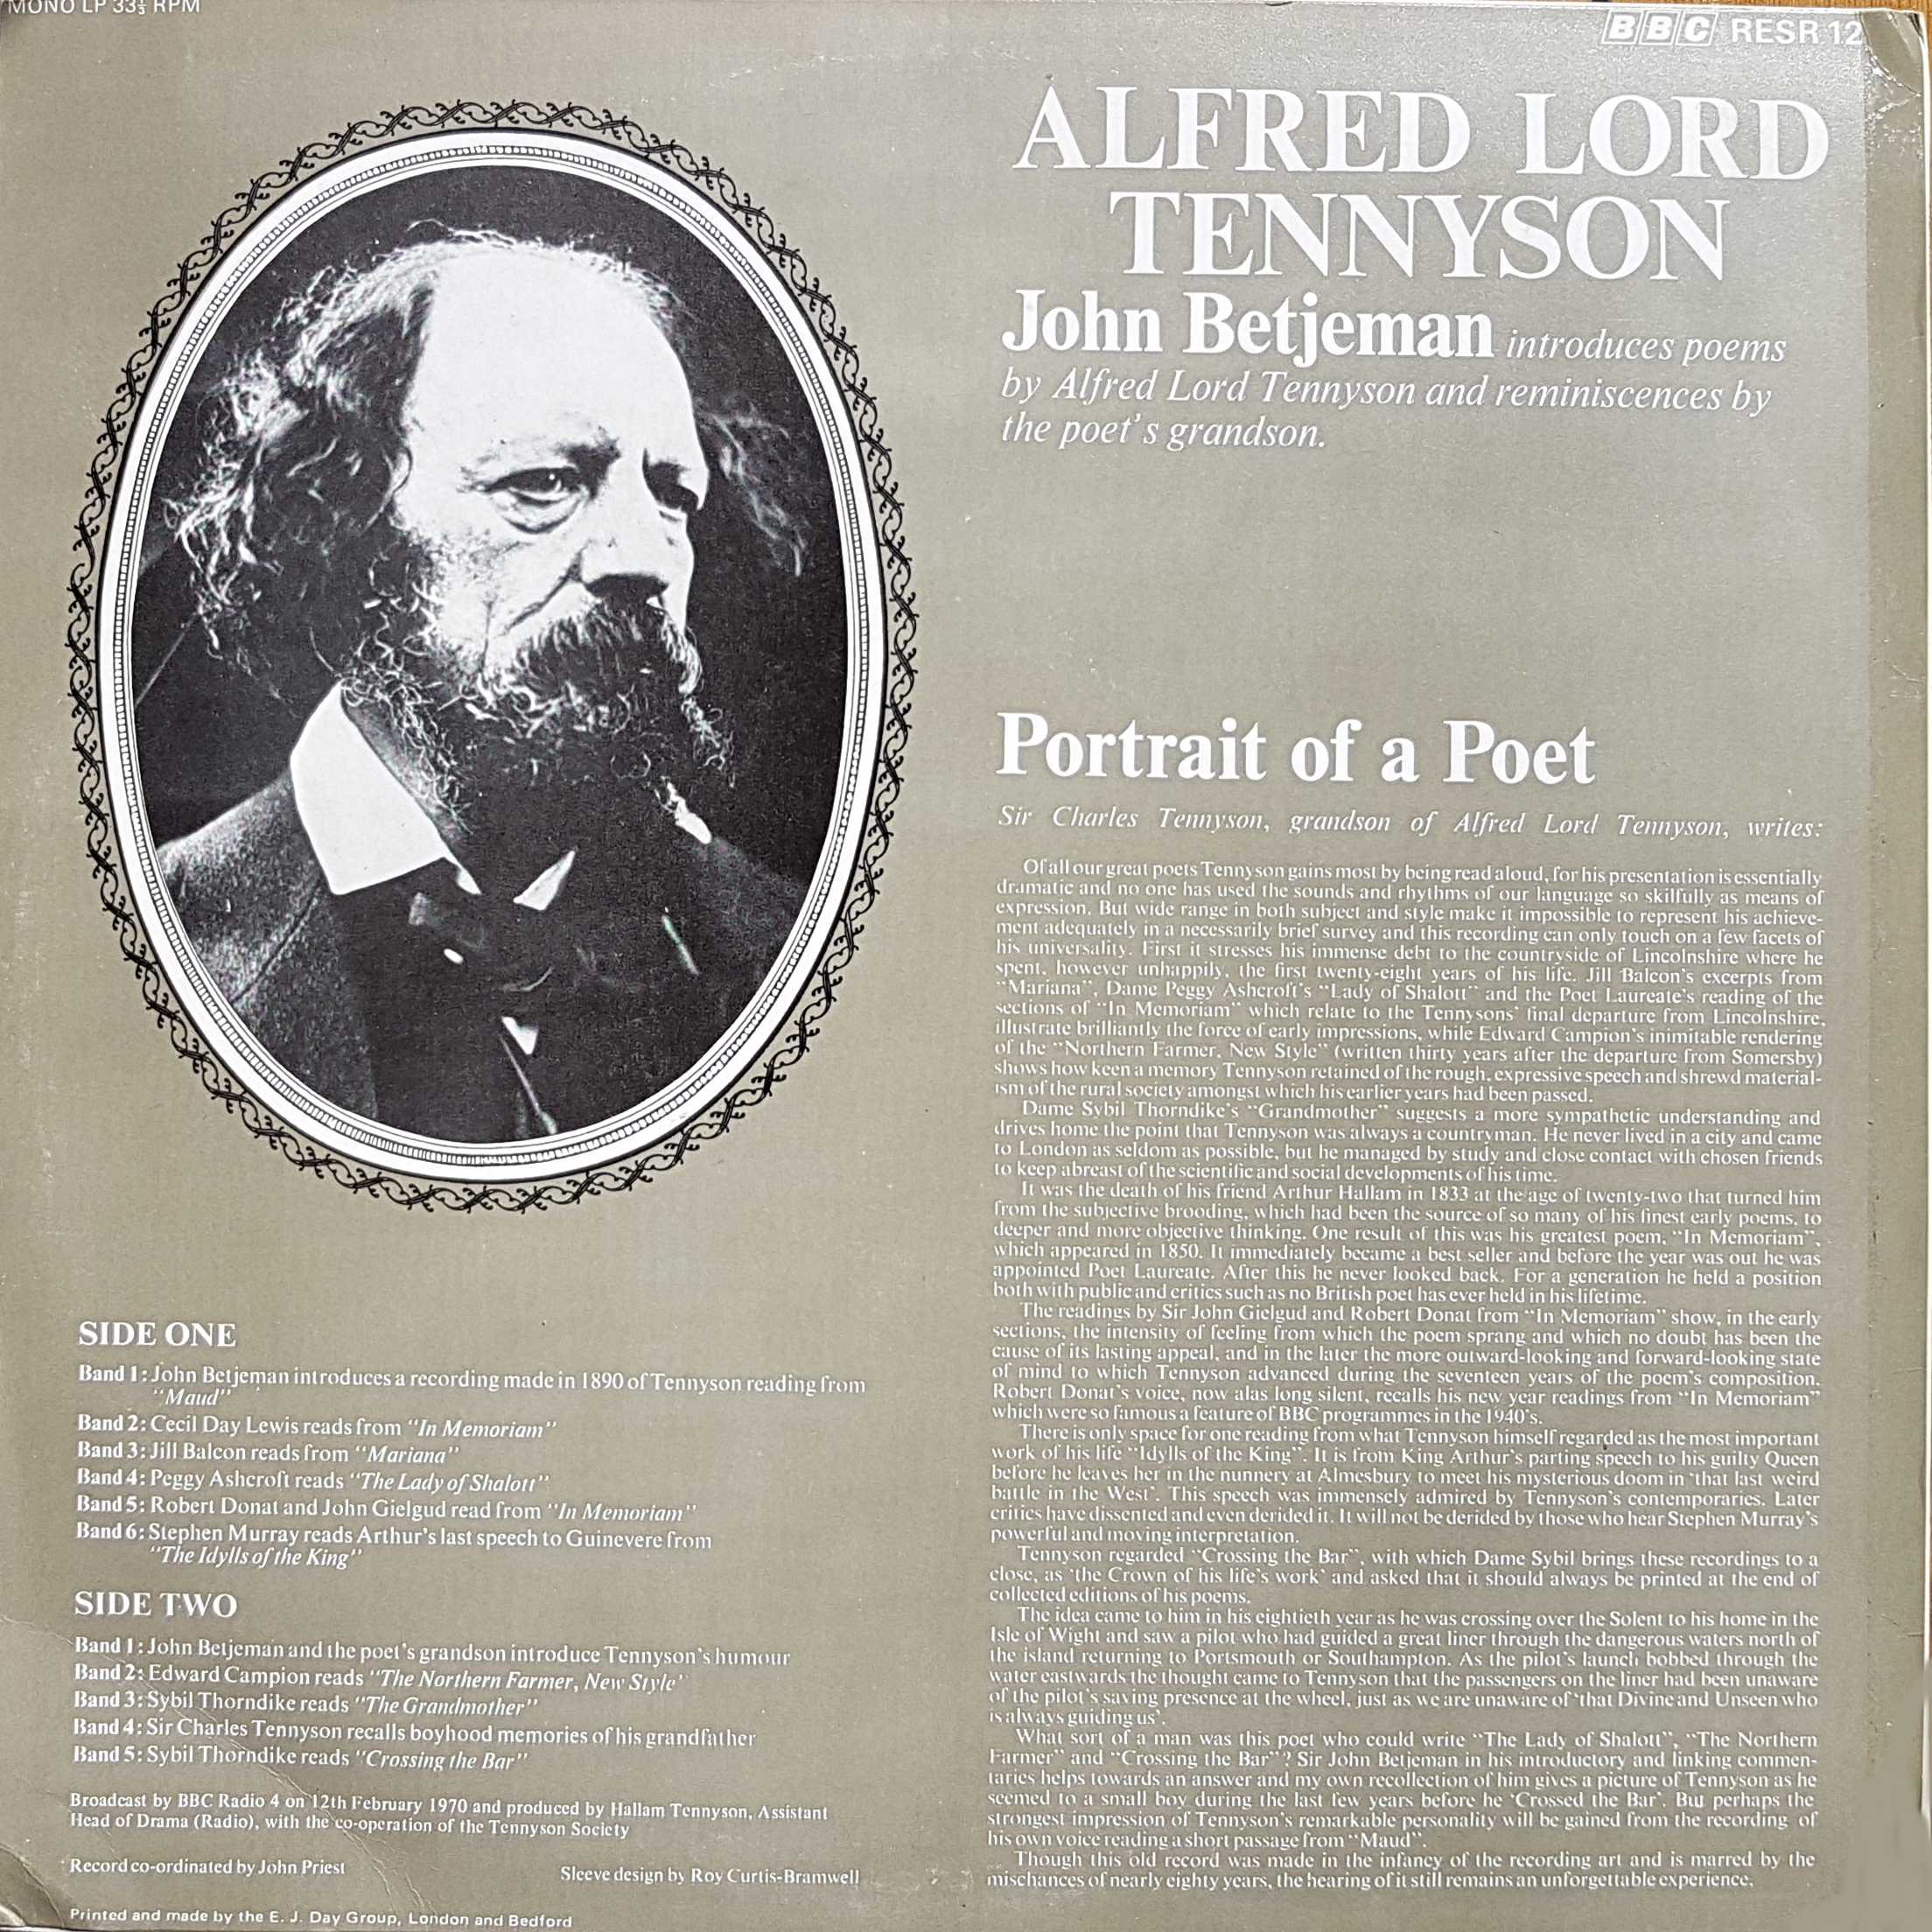 Picture of RESR 12 Alfred Lord Tennyson - Portrait of a poet by artist Alfred Lord Tennyson / John Betjeman from the BBC records and Tapes library